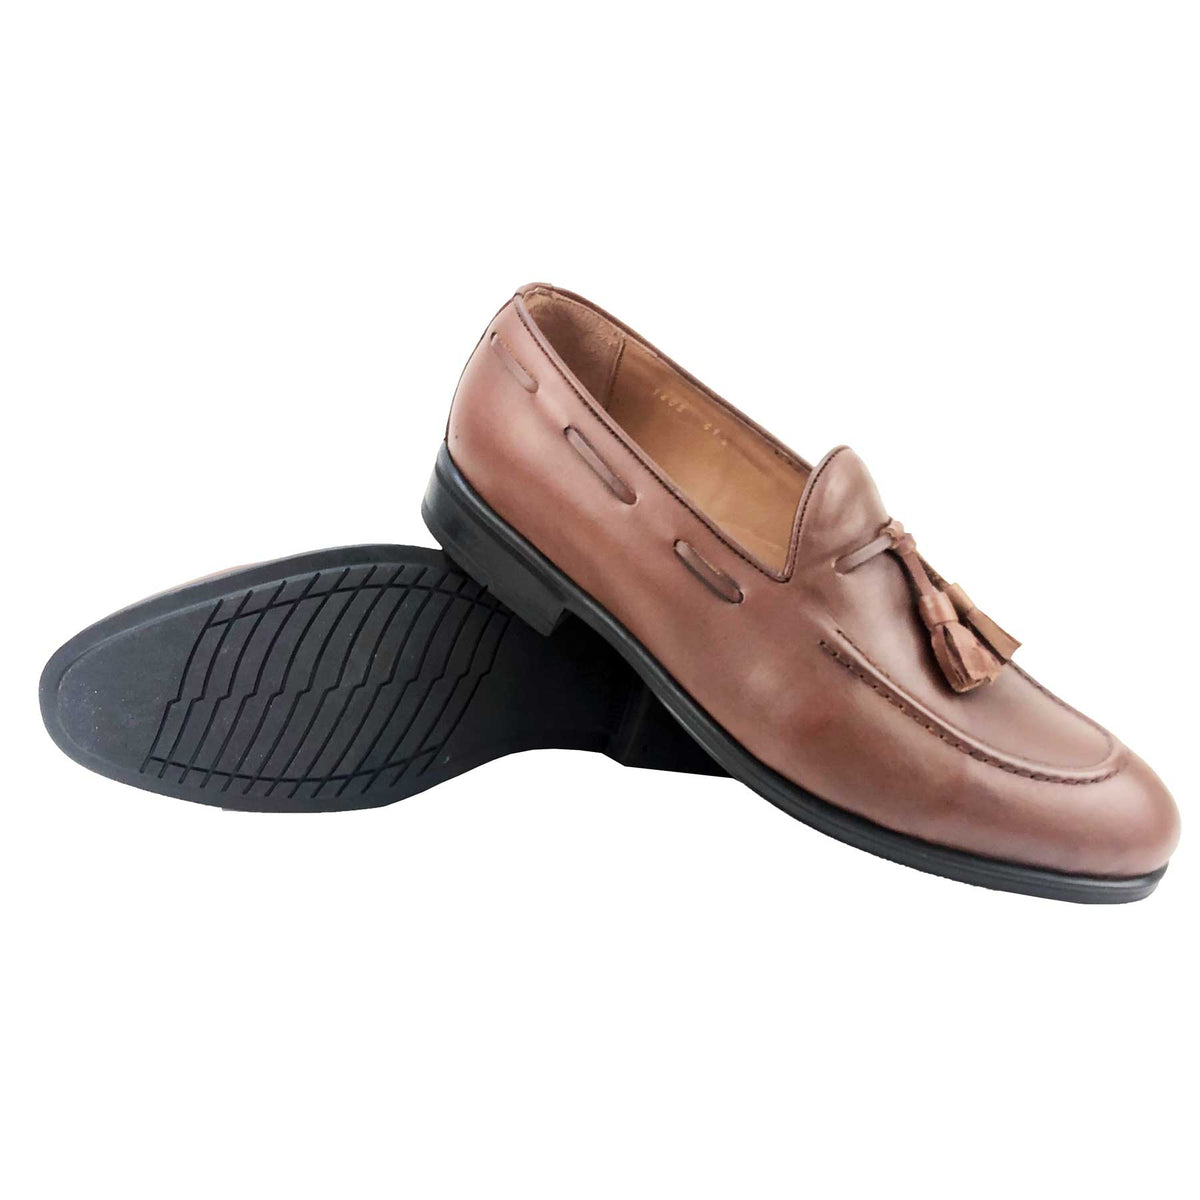 CH1402-015 - Chaussure cuir Taba - deluxe-maroc